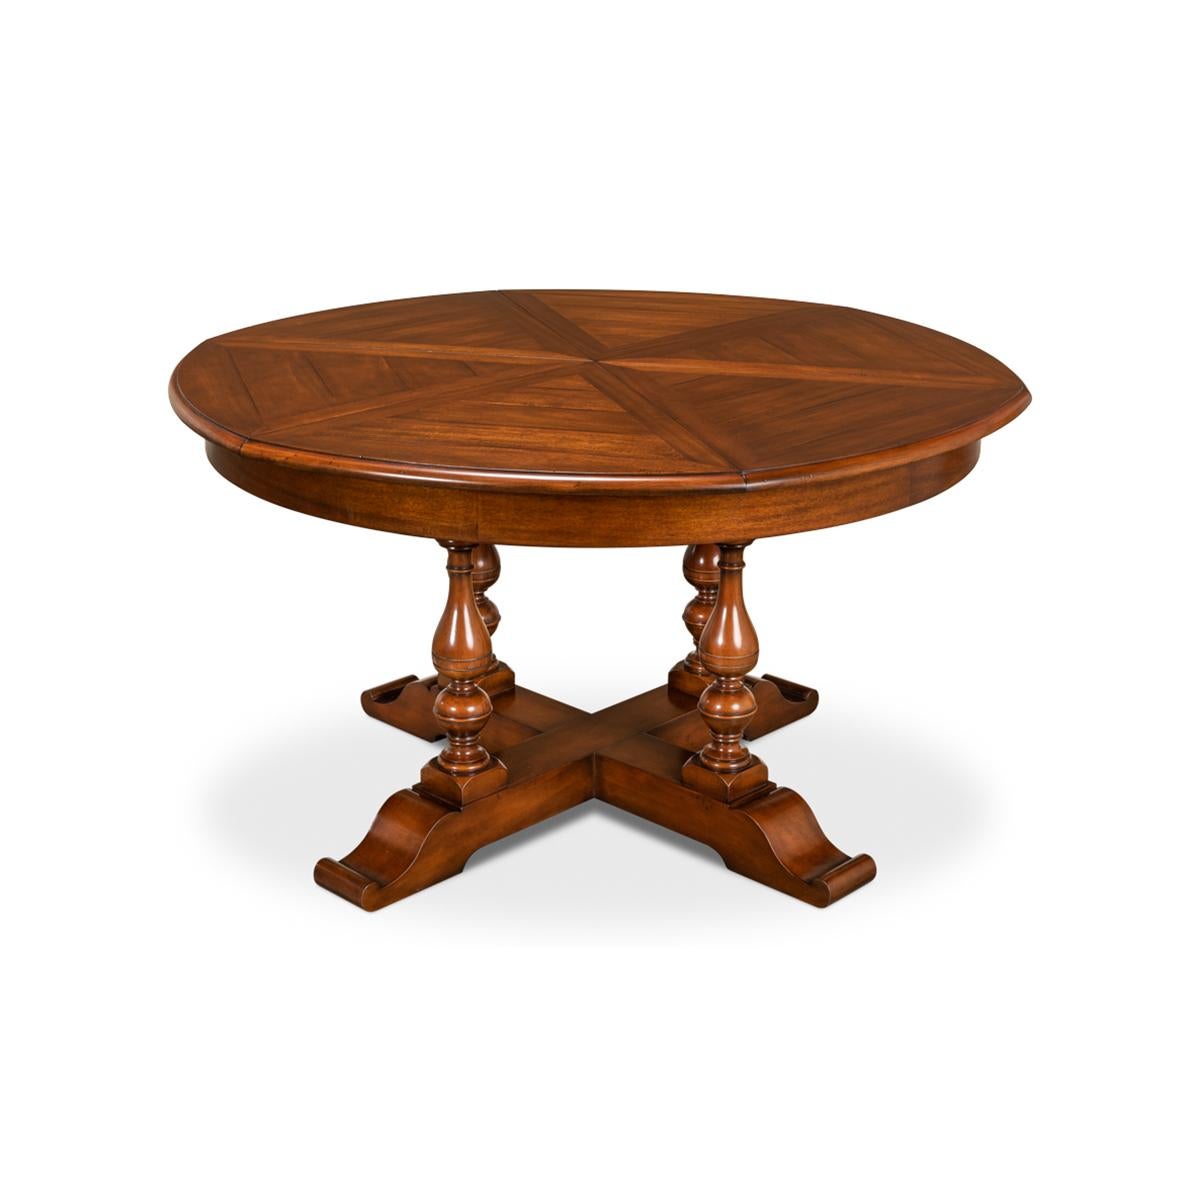 Early English Style Round Extension Dining Table, 70